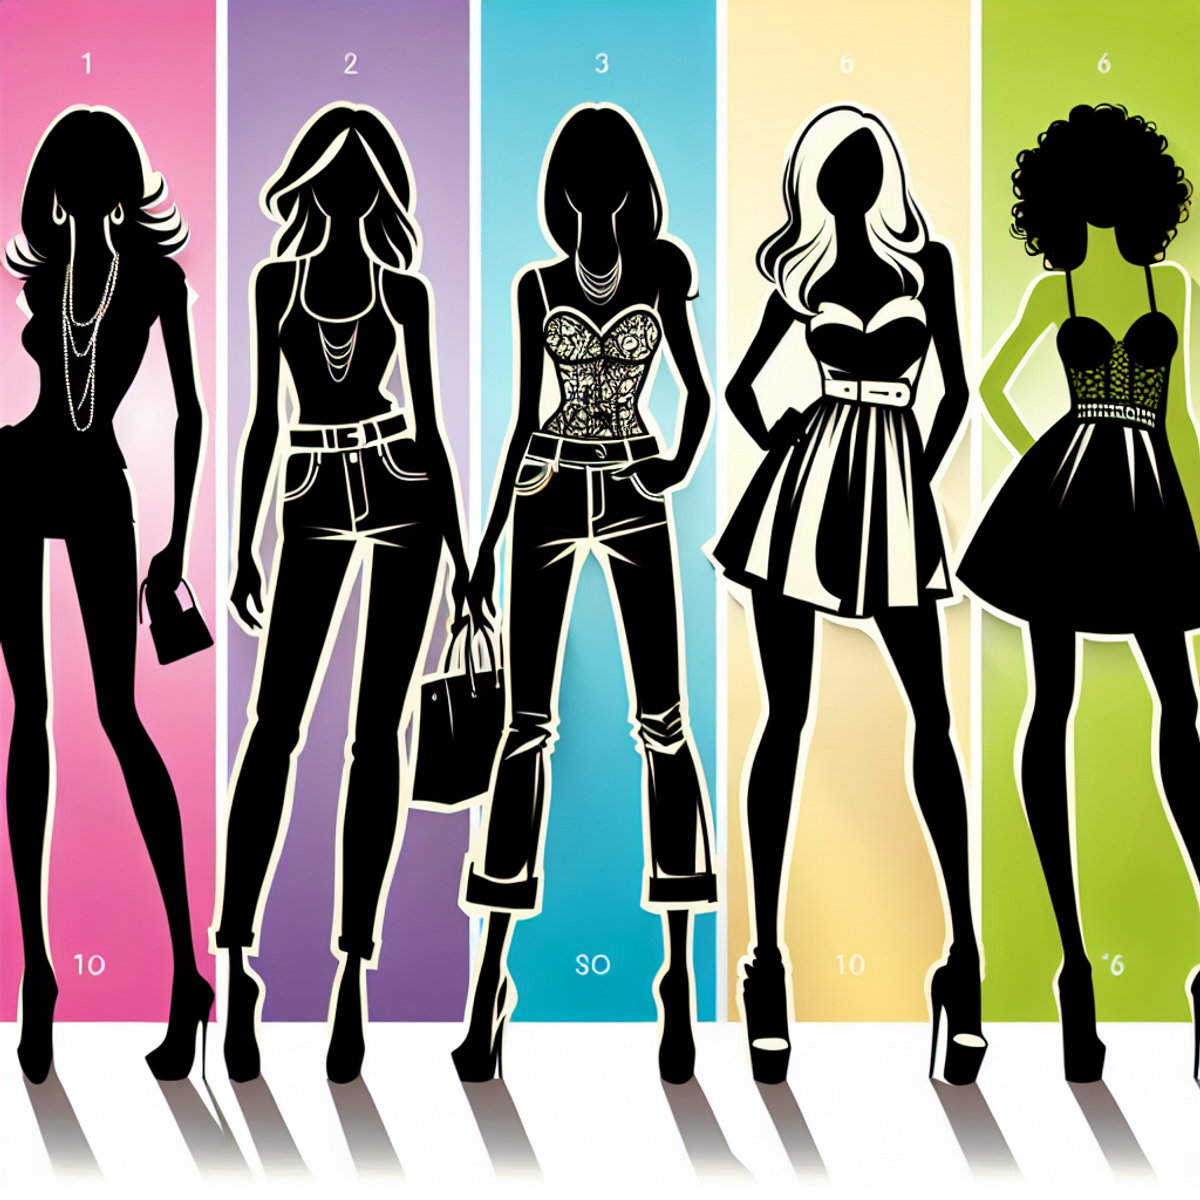 A diverse group of stylish silhouettes representing different body types in fashionable attire against a colorful background.